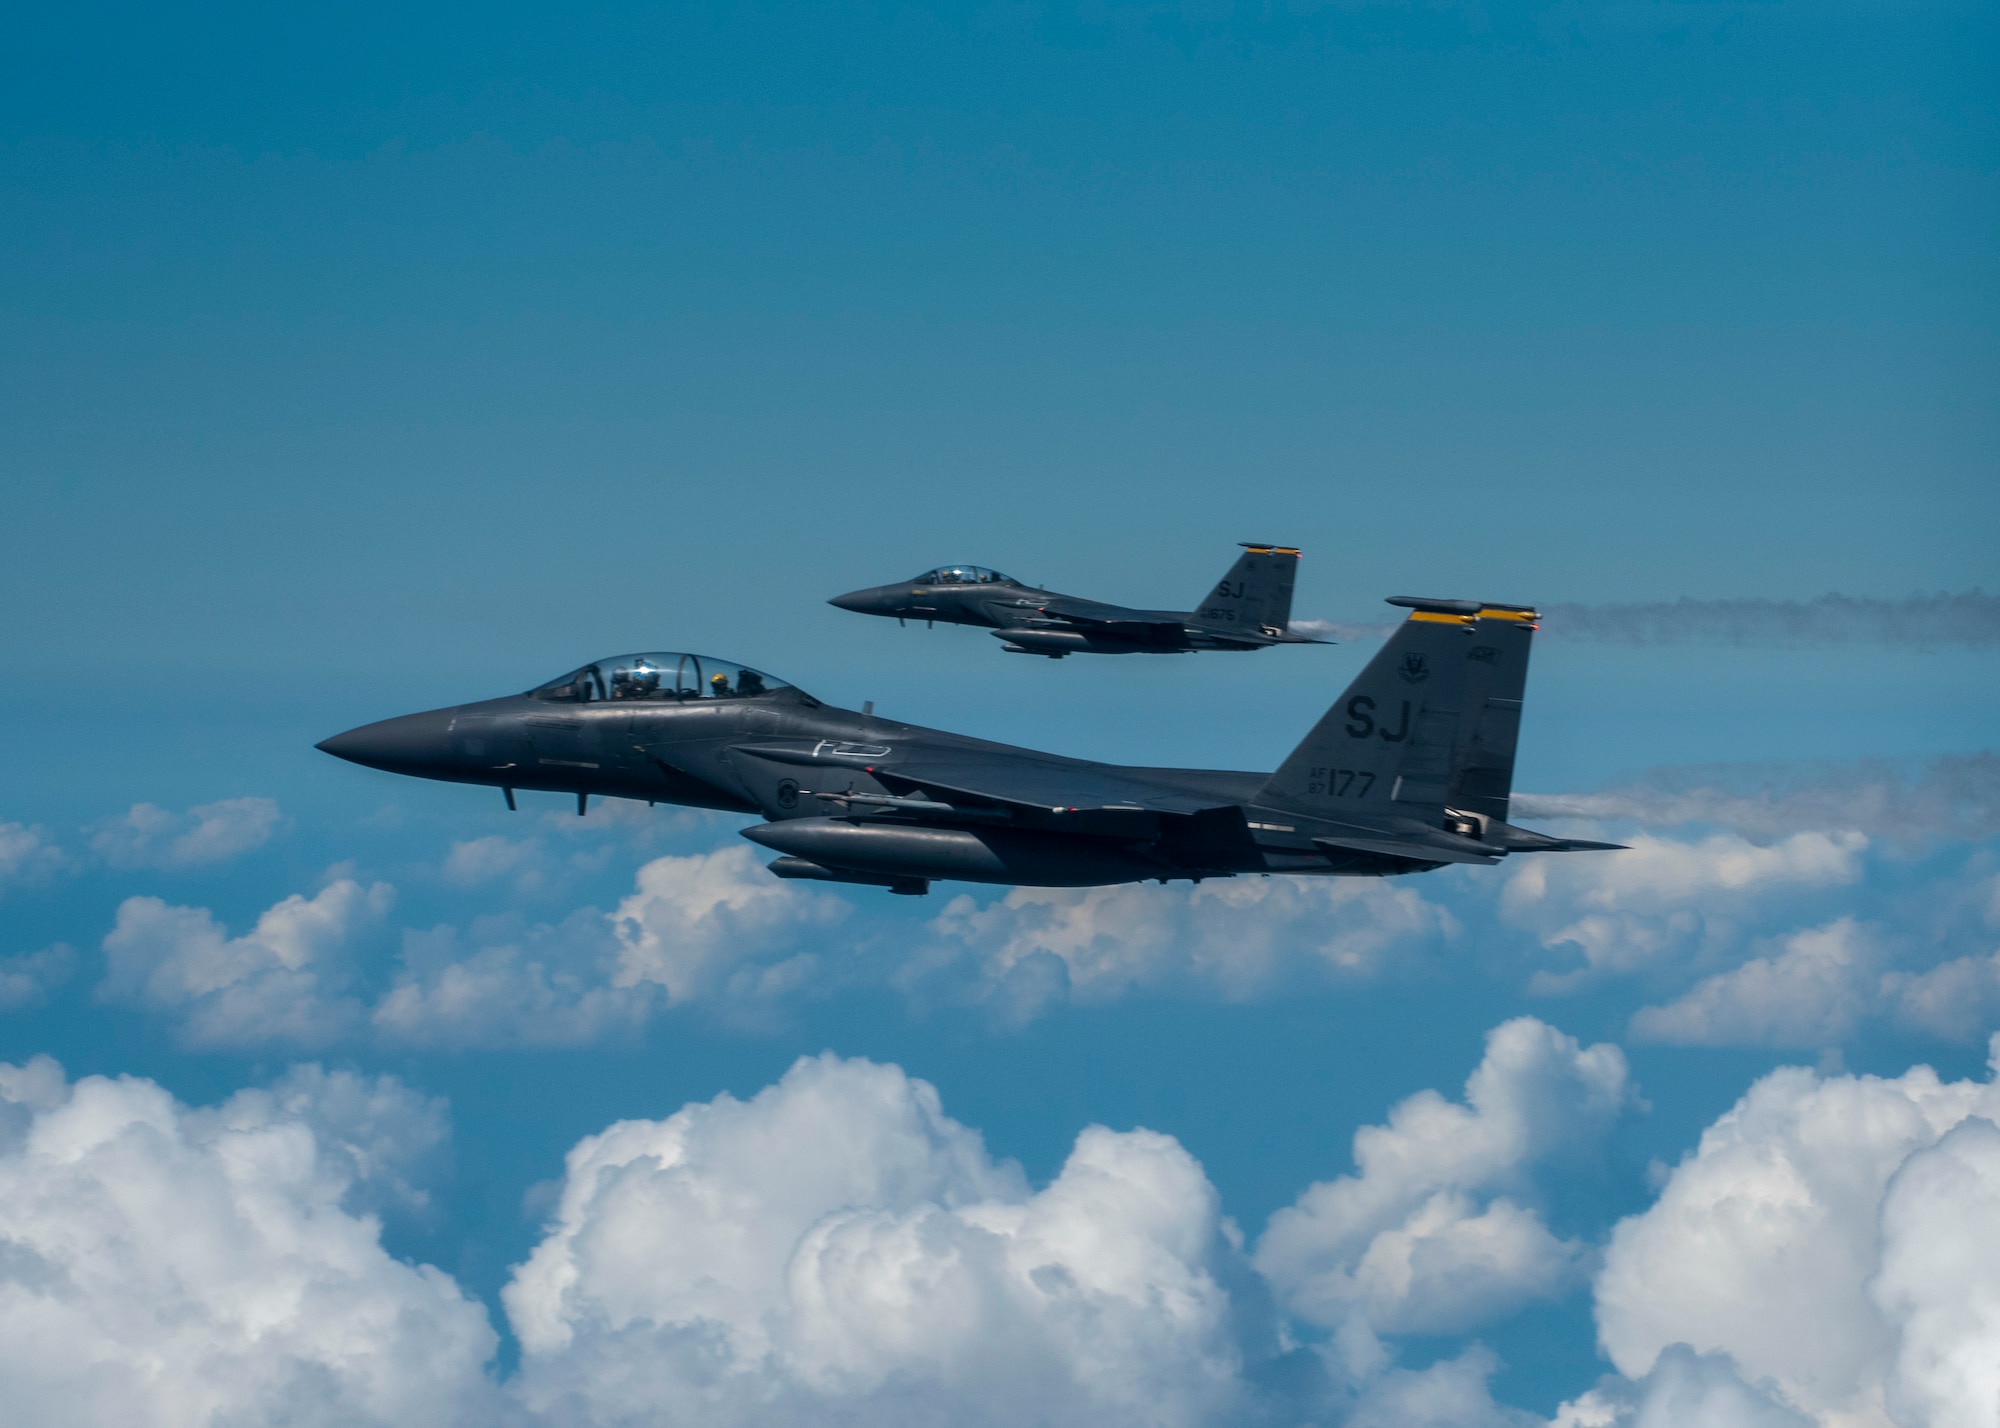 Two F-15E Strike Eagles from the 336th Fighter Squadron at Seymour Johnson Air Force Base fly over the sky of North Carolina.